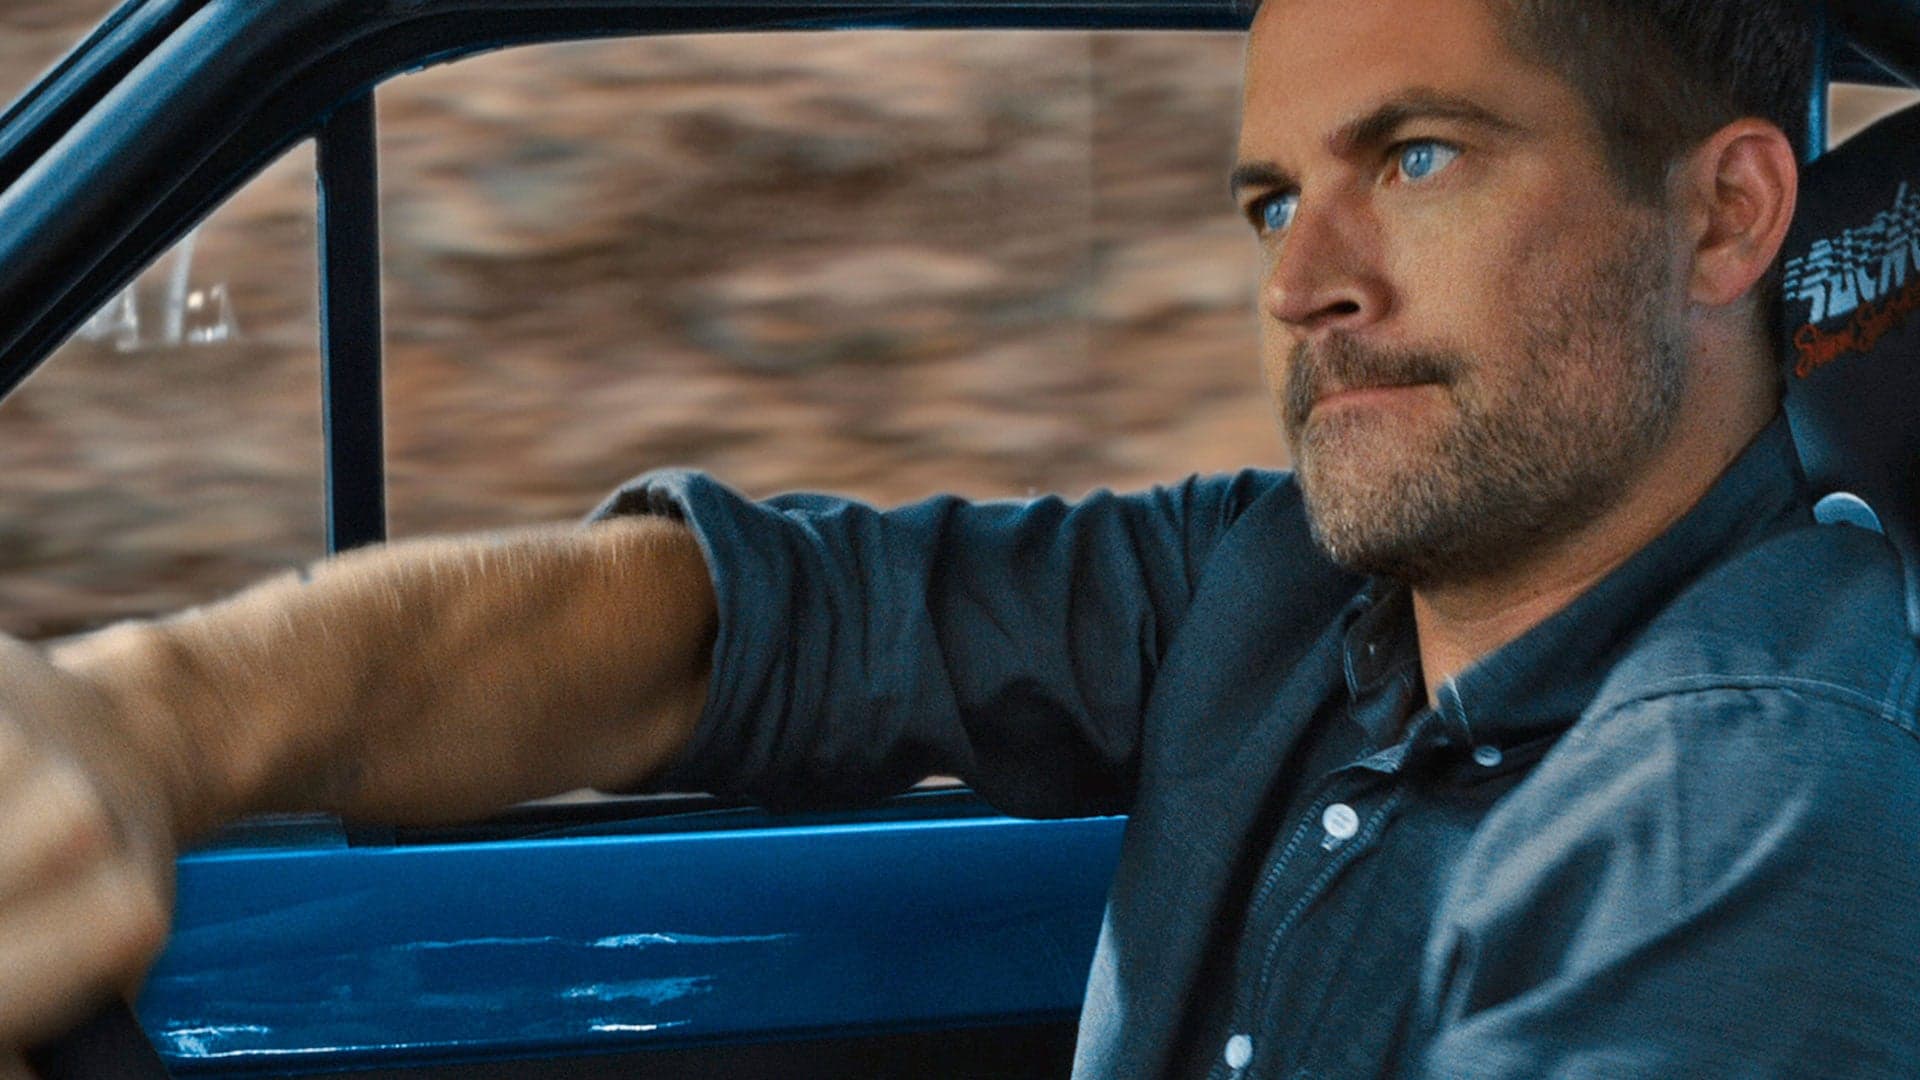 How Furious 7 Magically Filmed Paul Walker After His Death